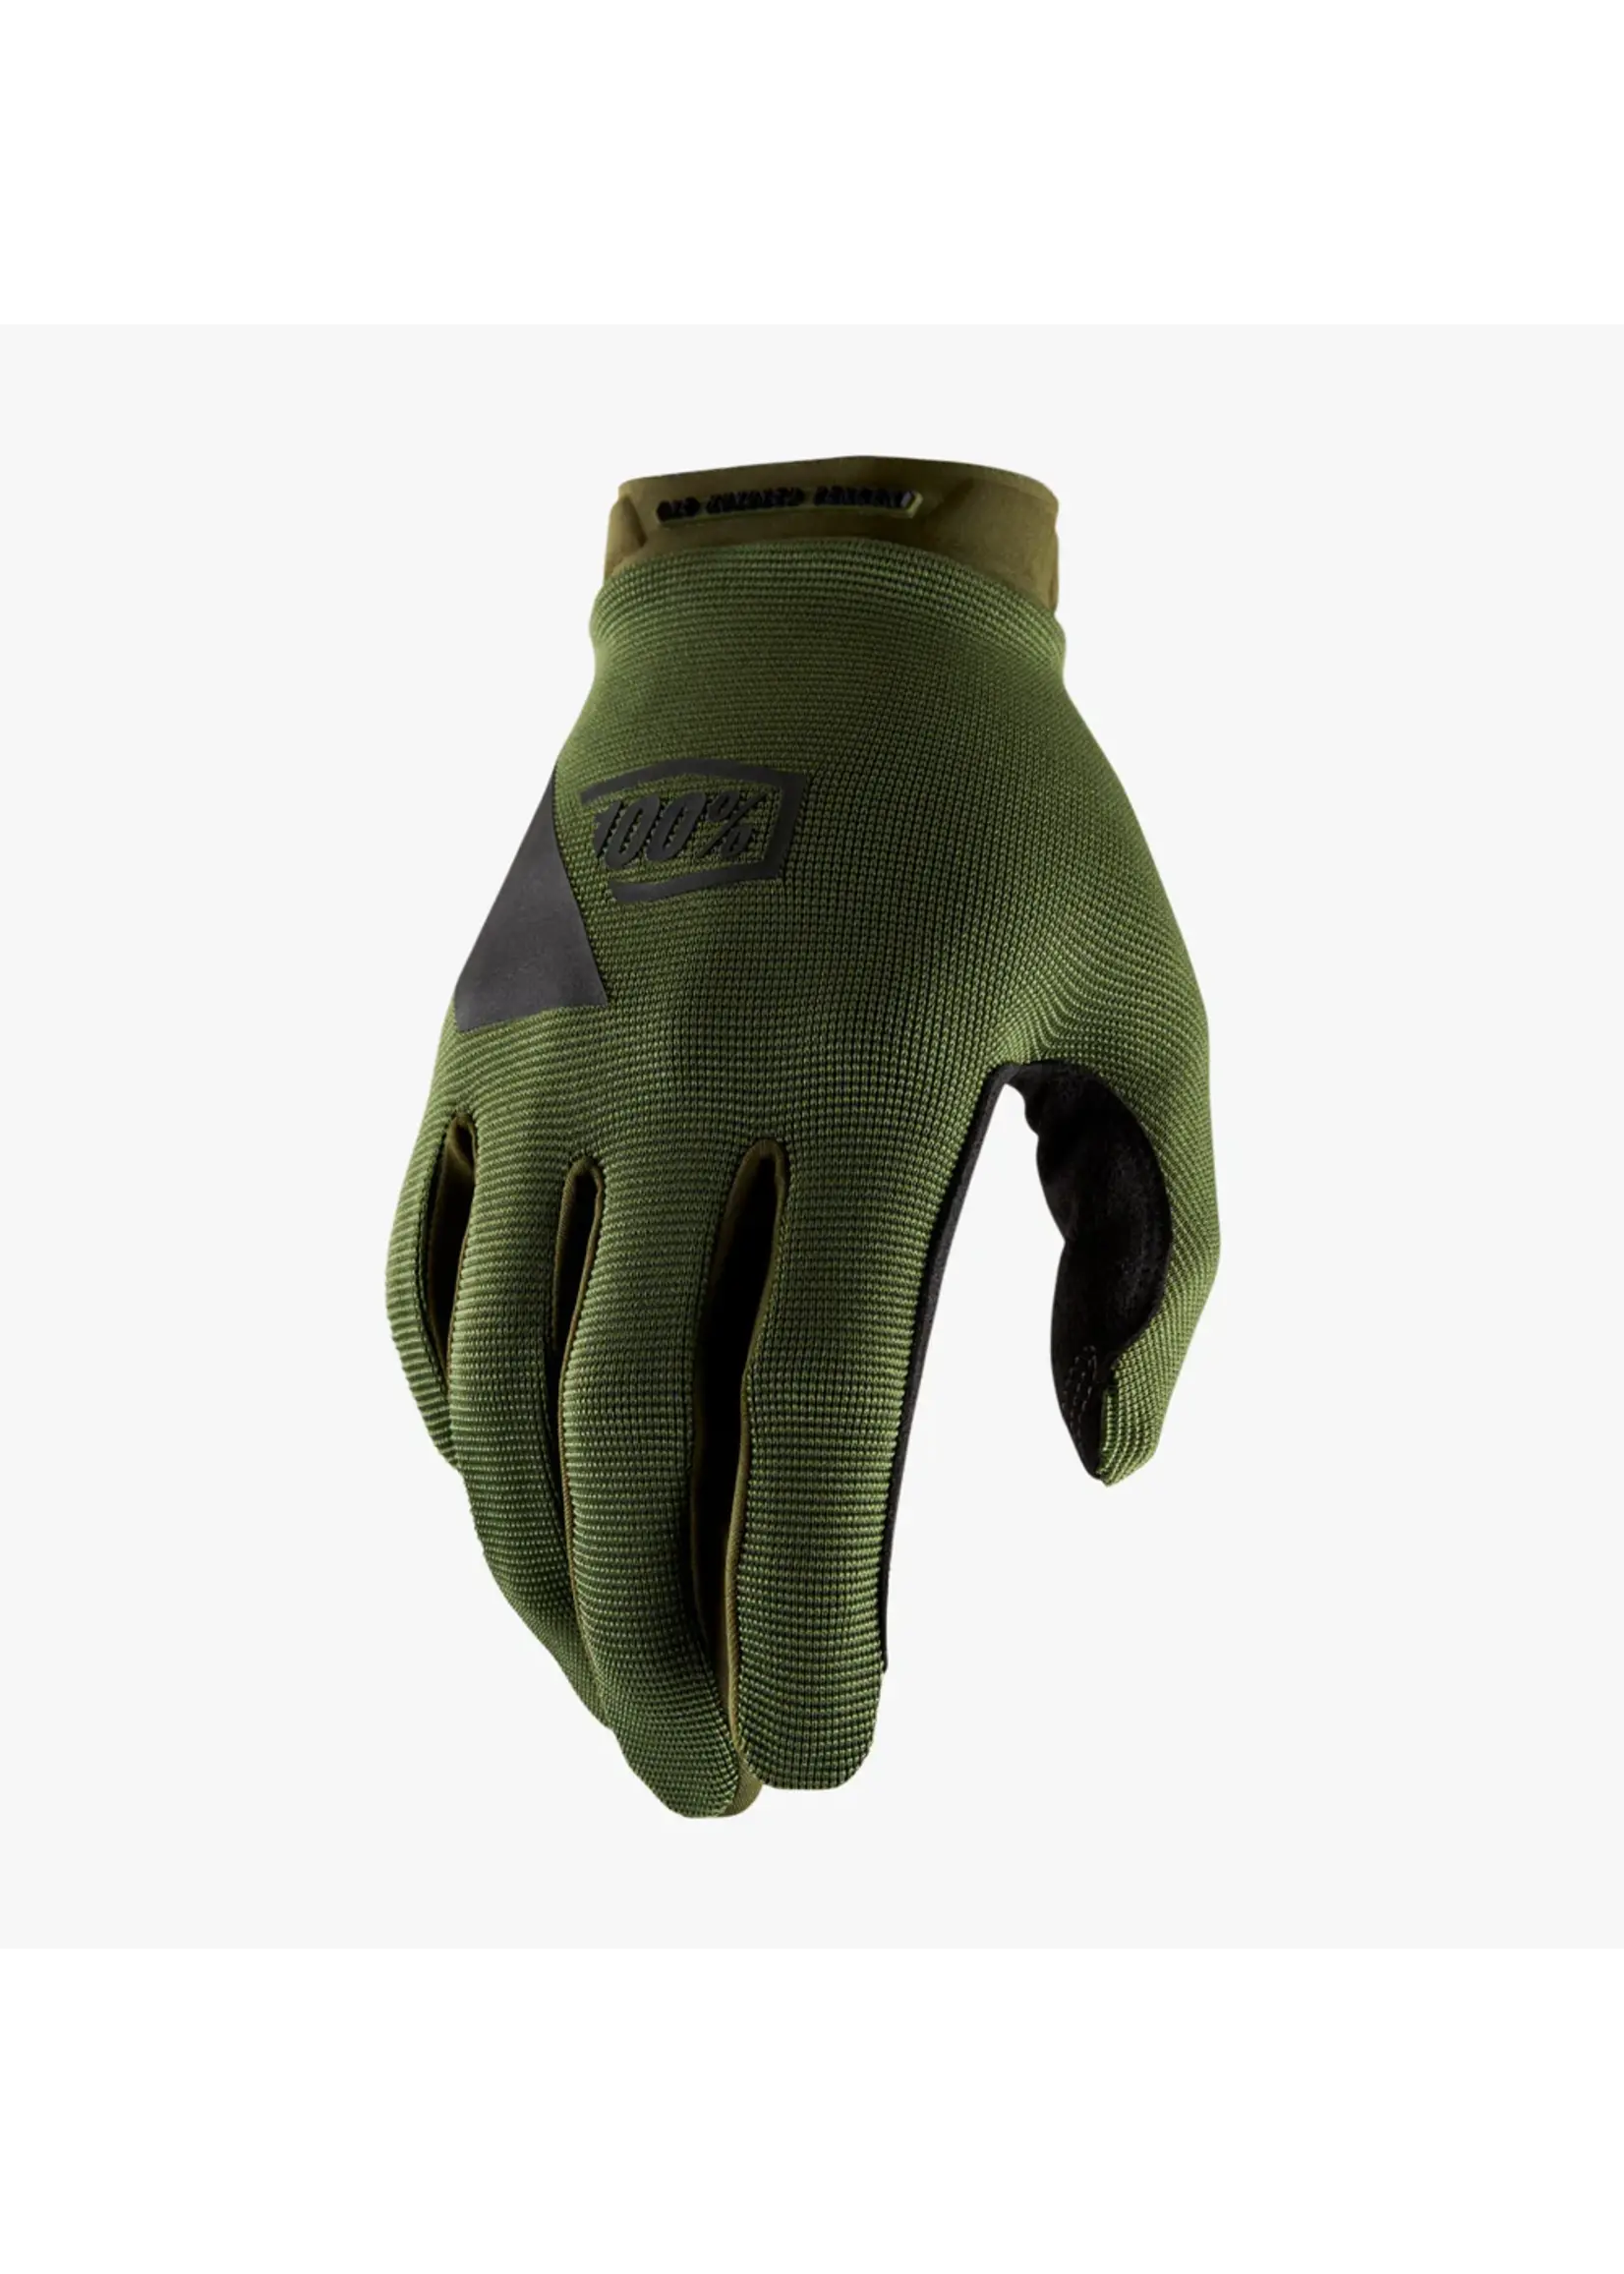 100 Percent 100% RideCamp Gloves, Fatigue Army Green/Black